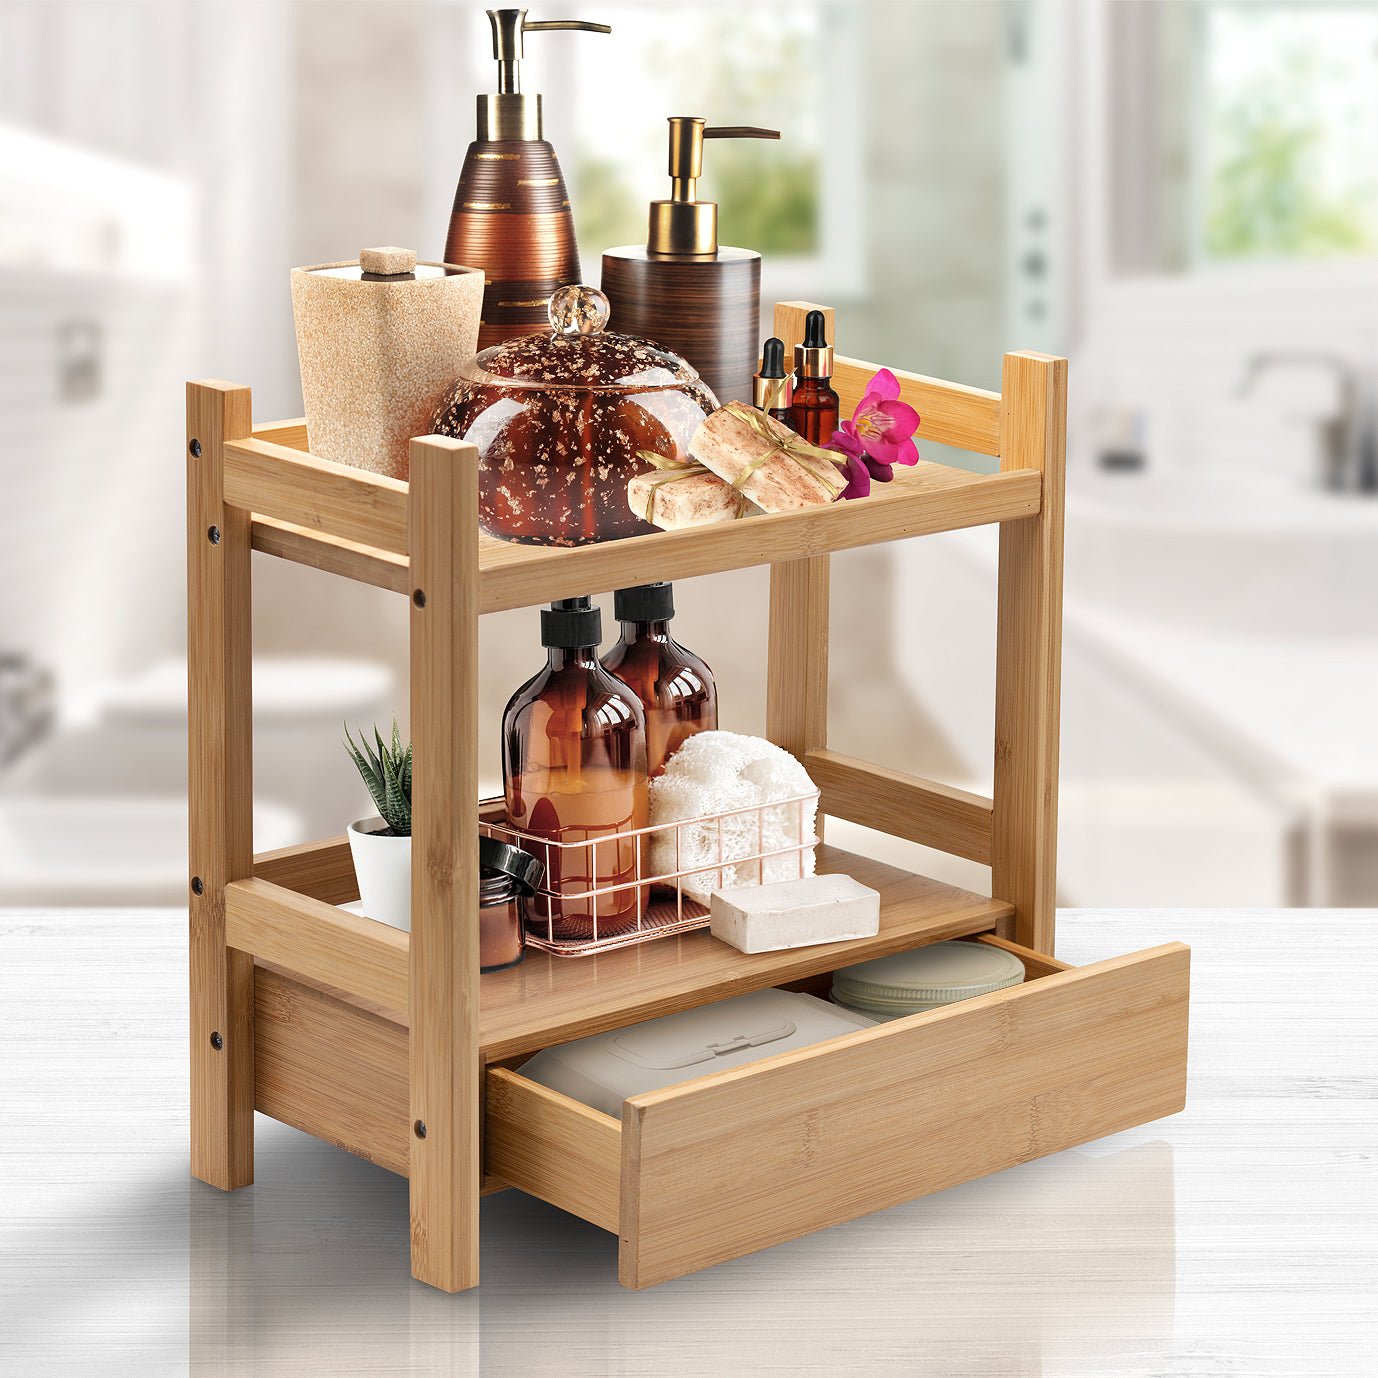 Bamboo Hanging Shower Caddy Made From Natural Bamboo 2 Level Storage  Organizer